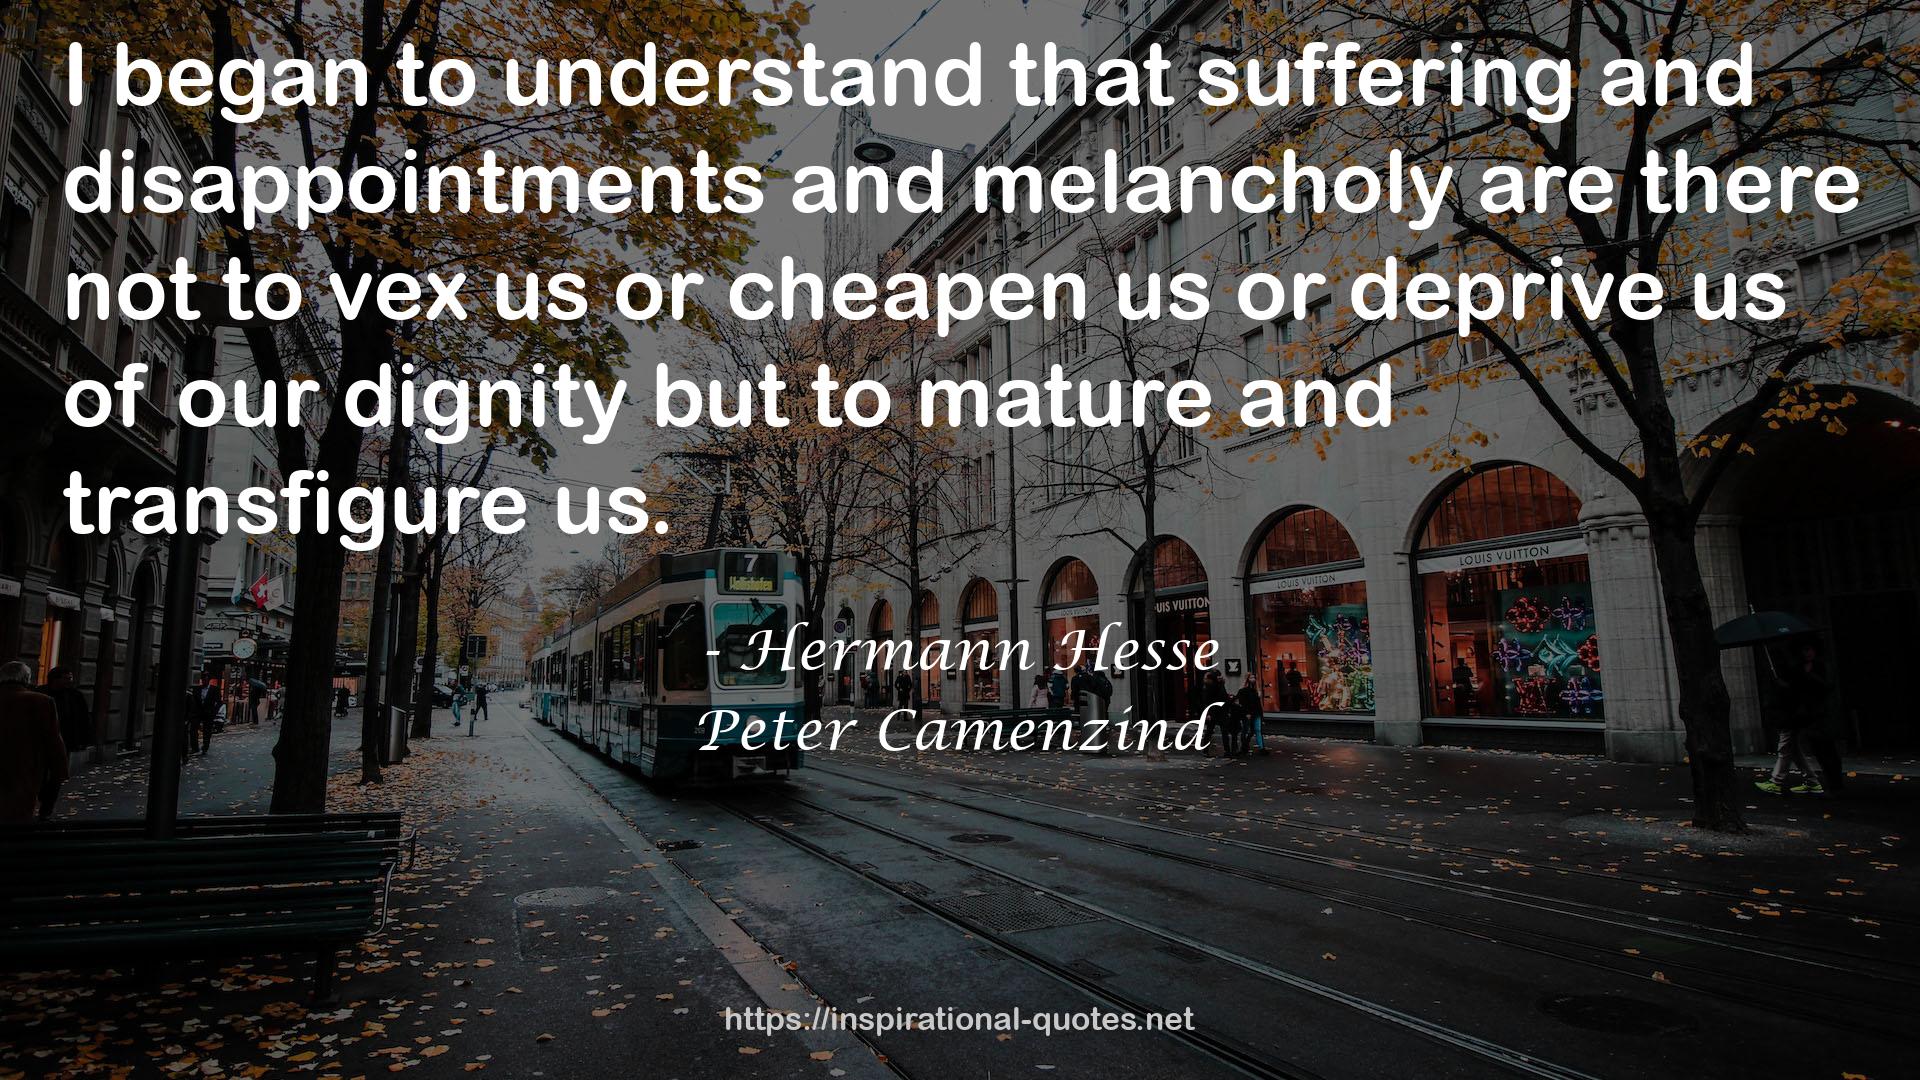 Hermann Hesse QUOTES